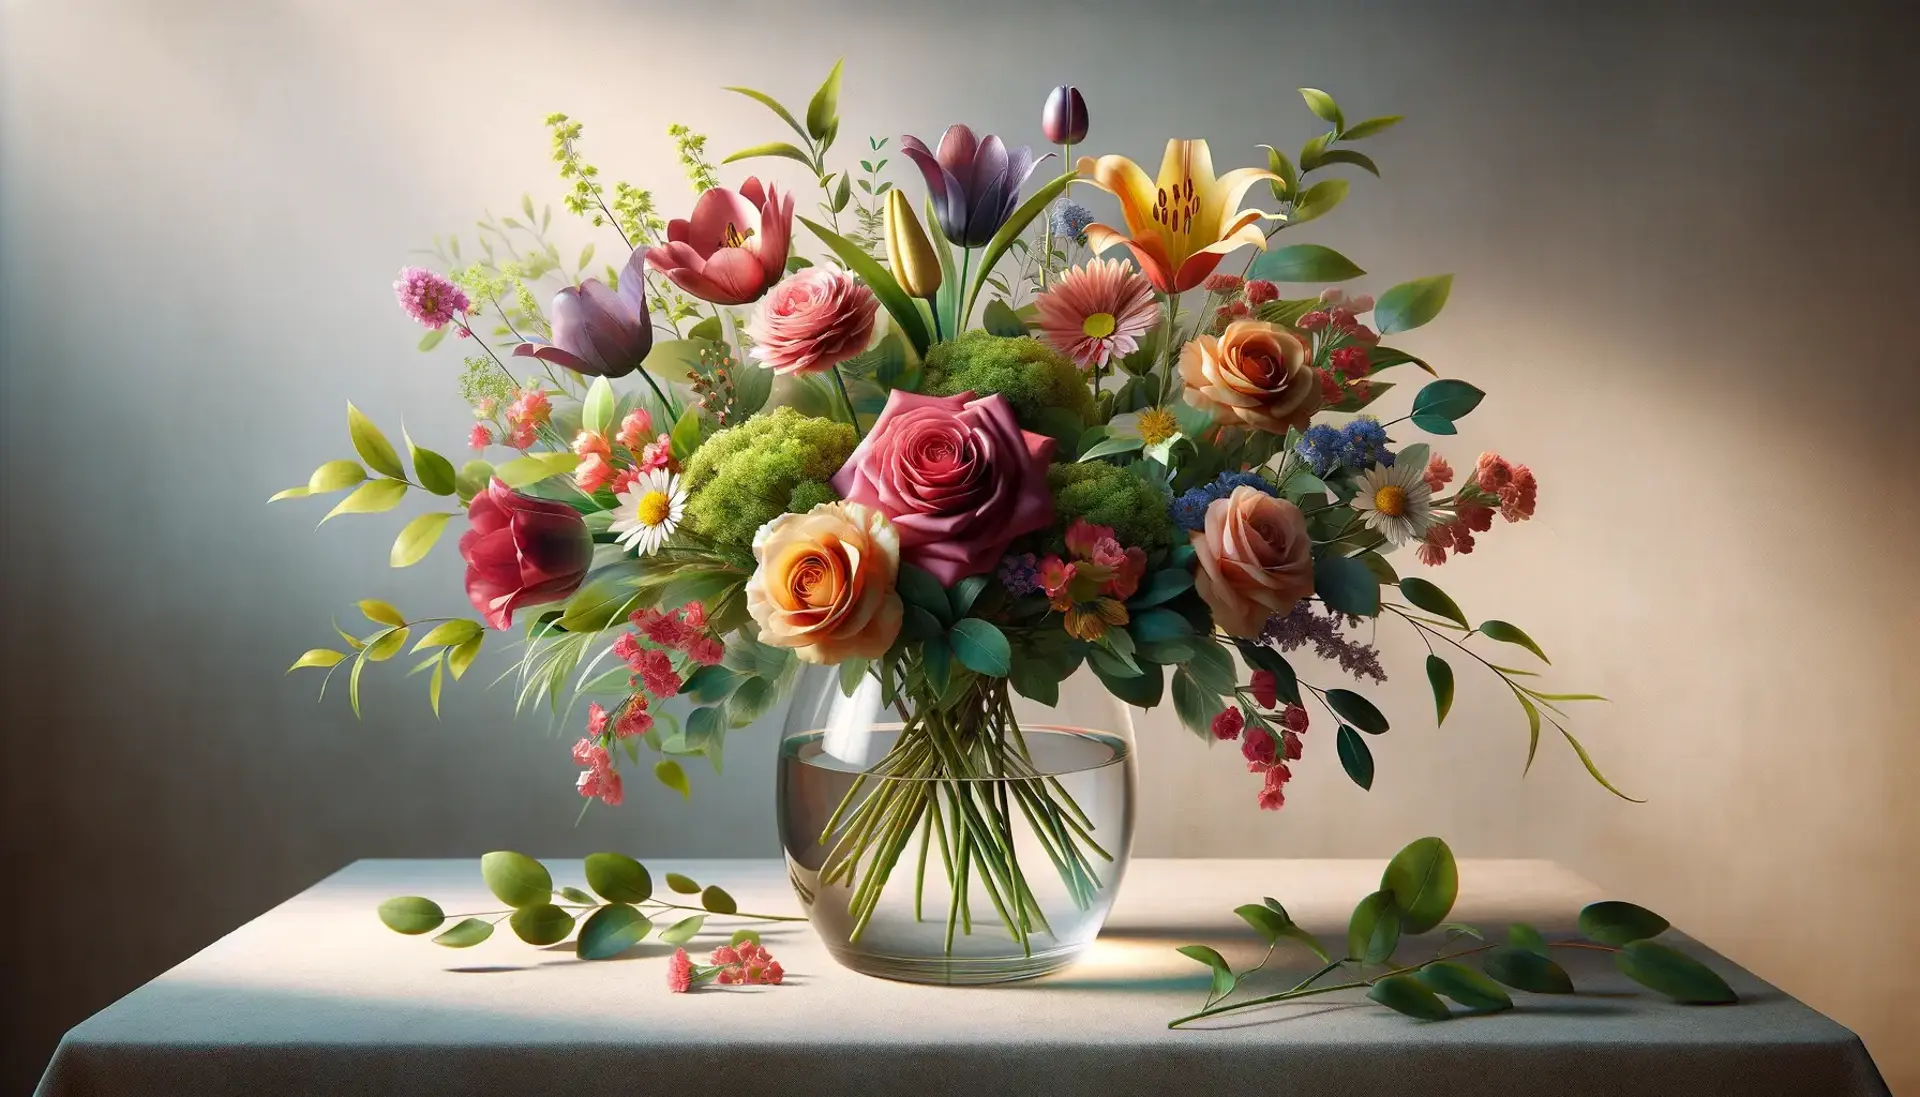  A stunning arrangement of vibrant flowers in a transparent glass vase, set against a soft, neutral background. 